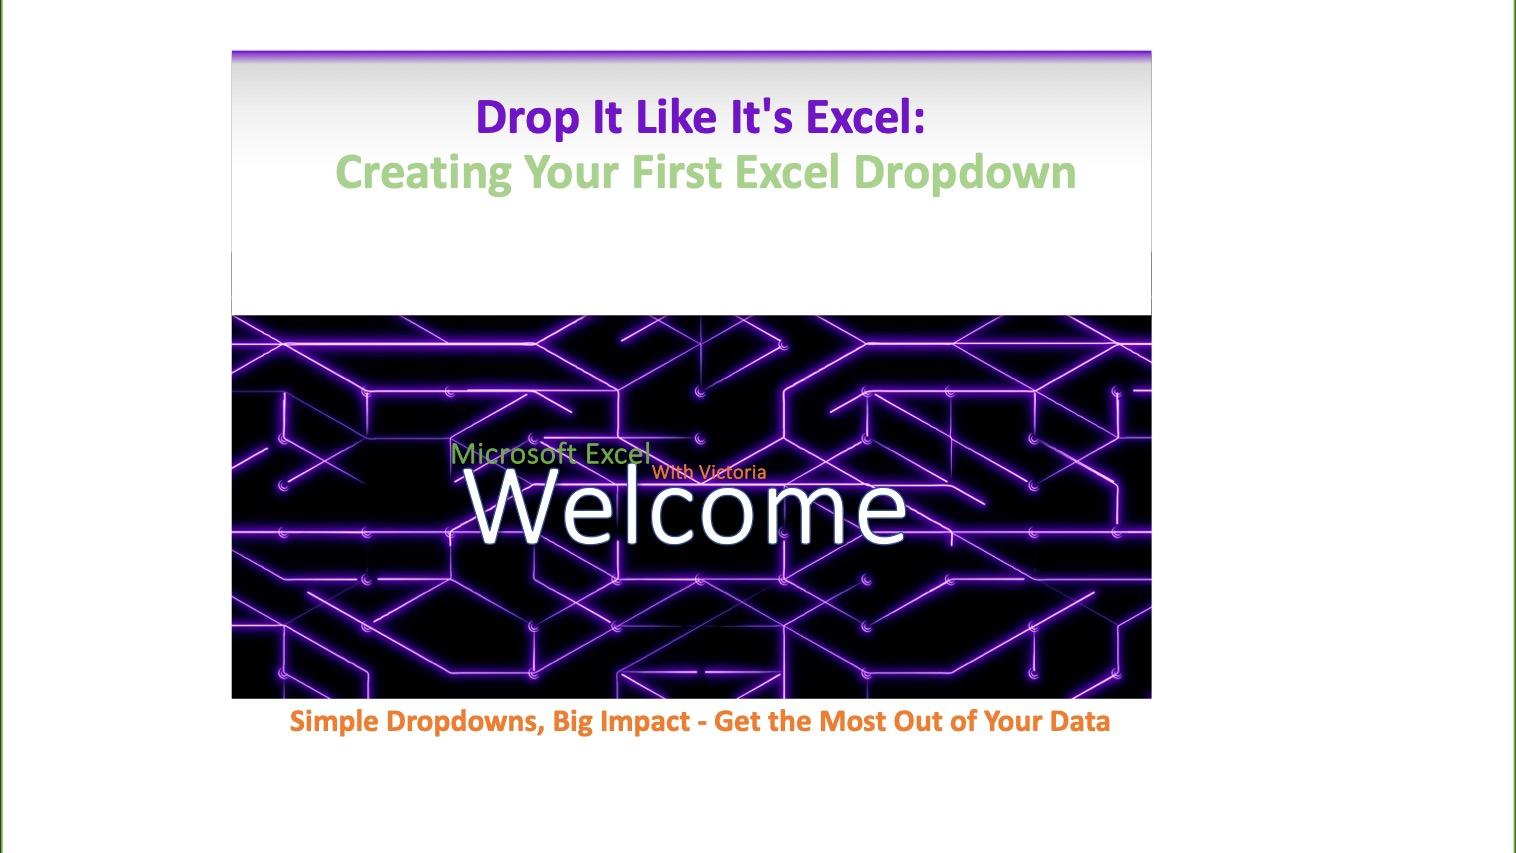 Drop It Like It's Excel: Creating Your First Excel Dropdown